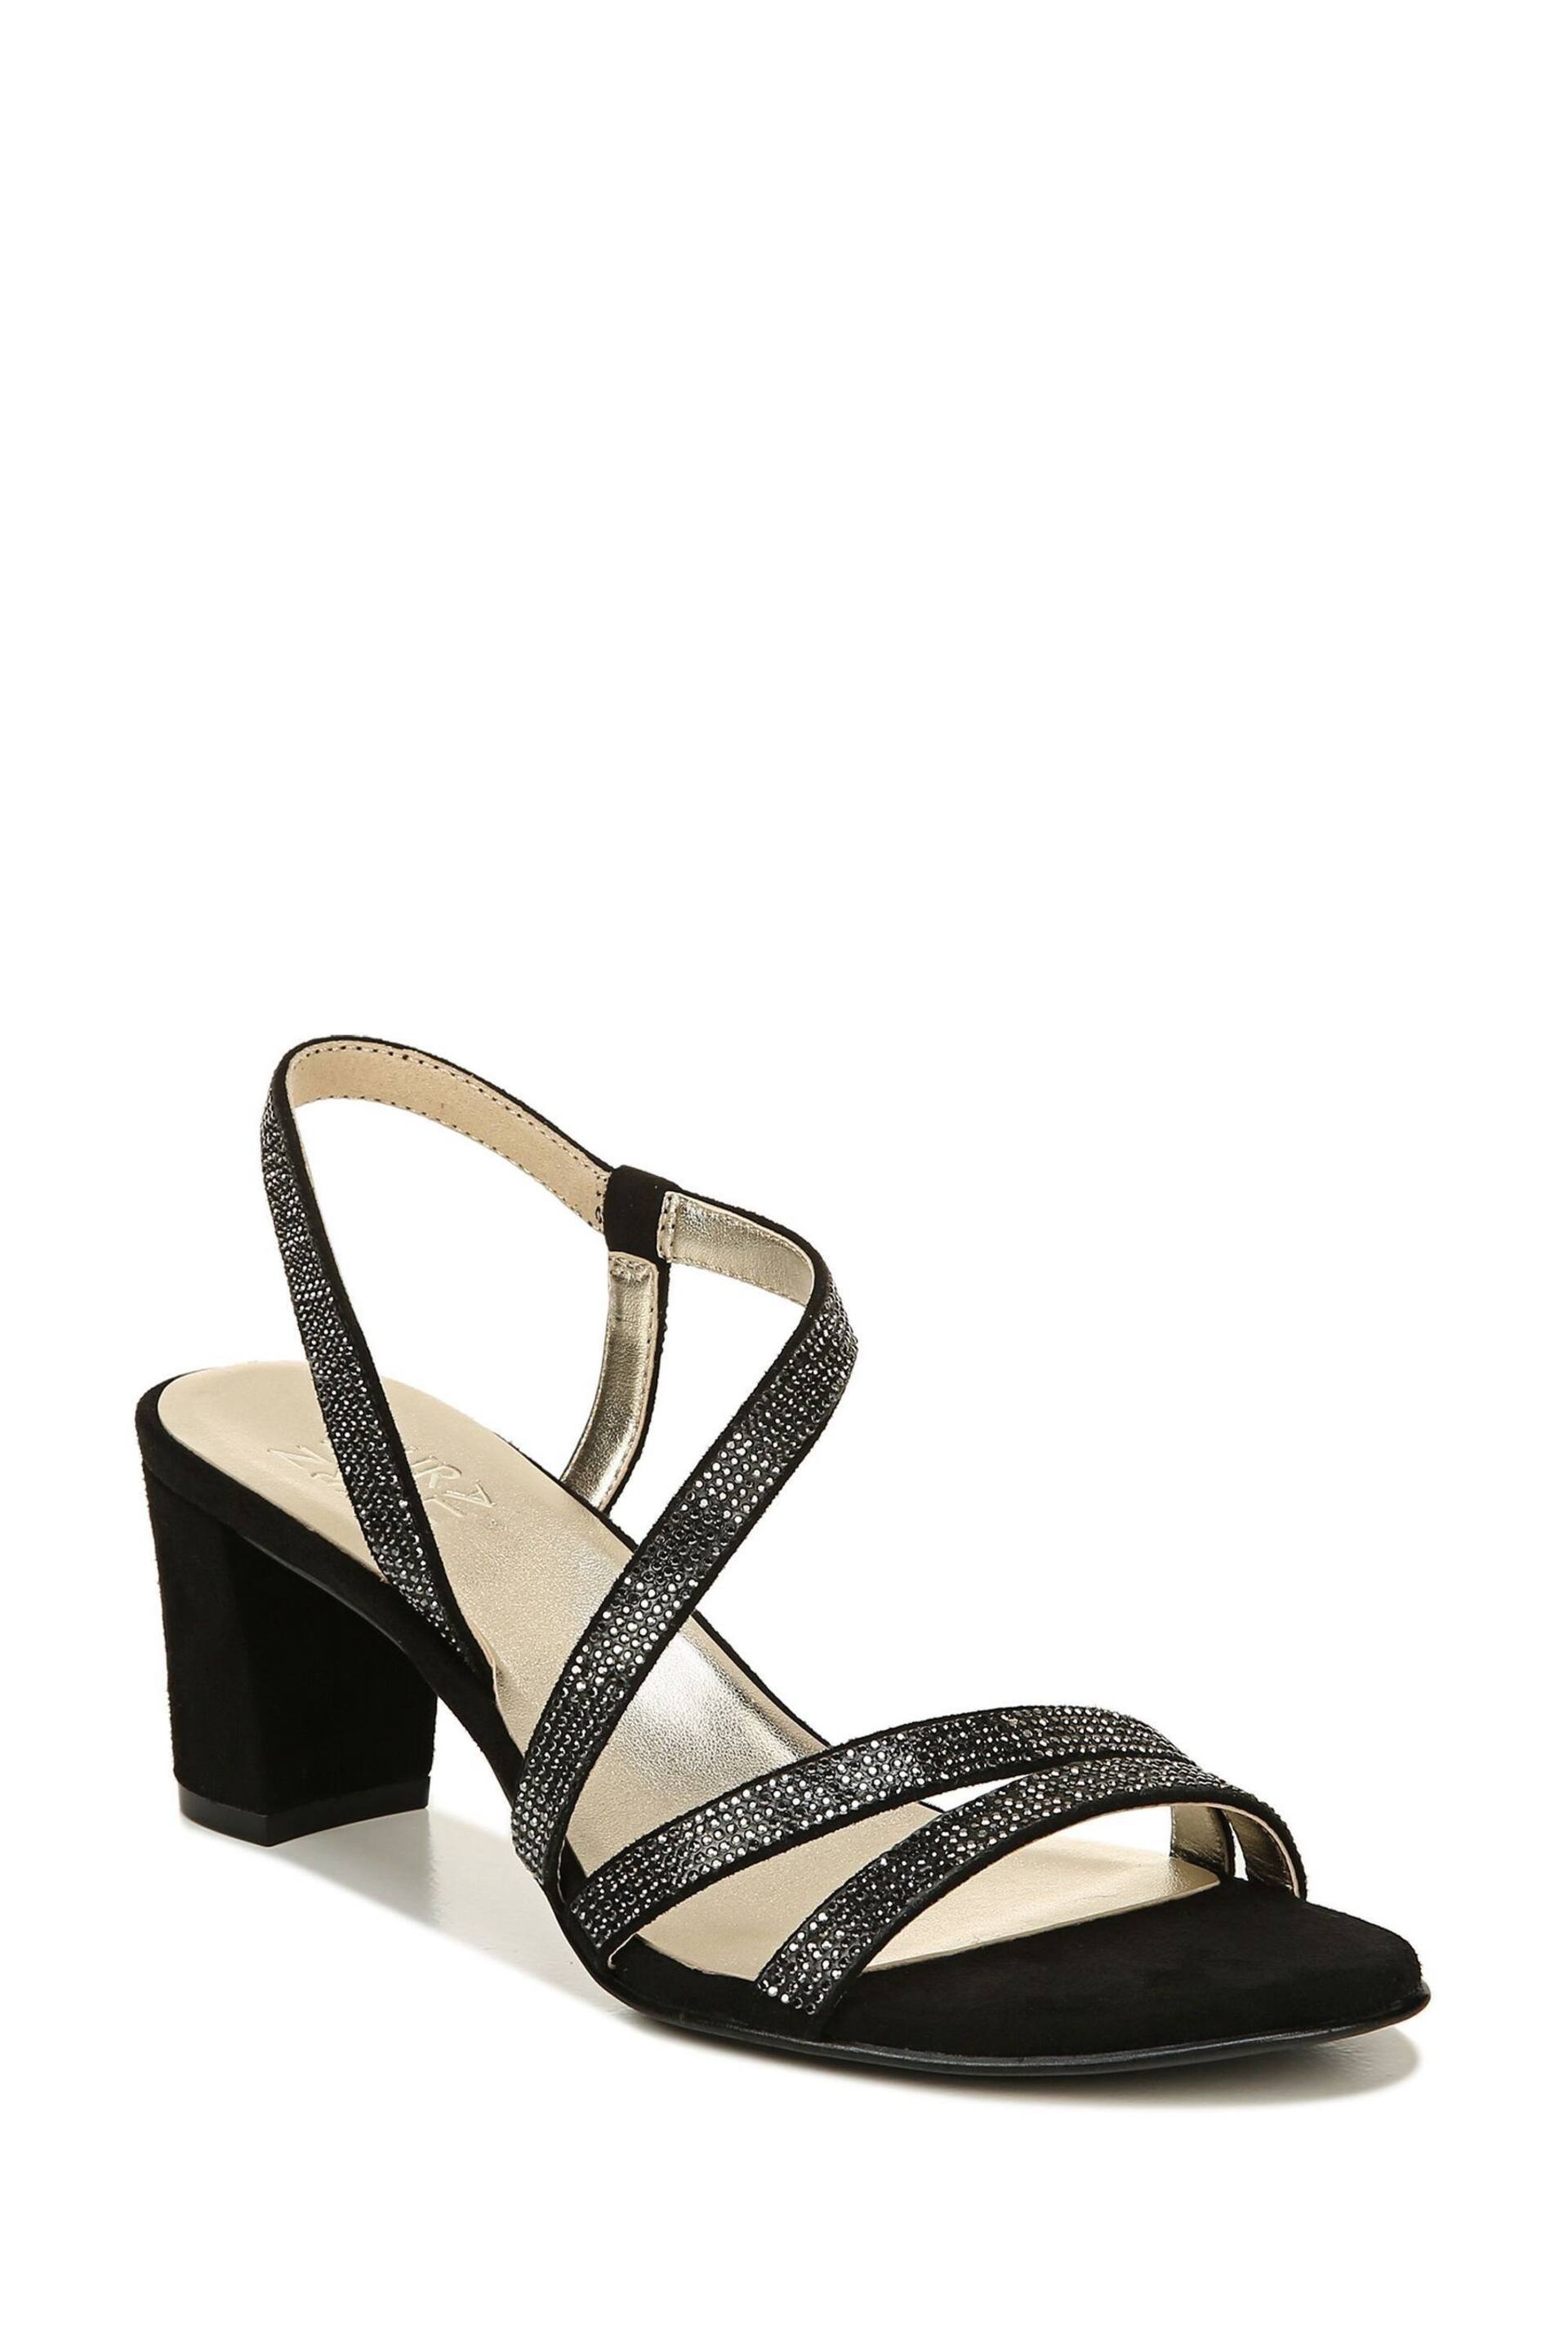 Naturalizer Vanessa Strappy Sandals - Image 3 of 7